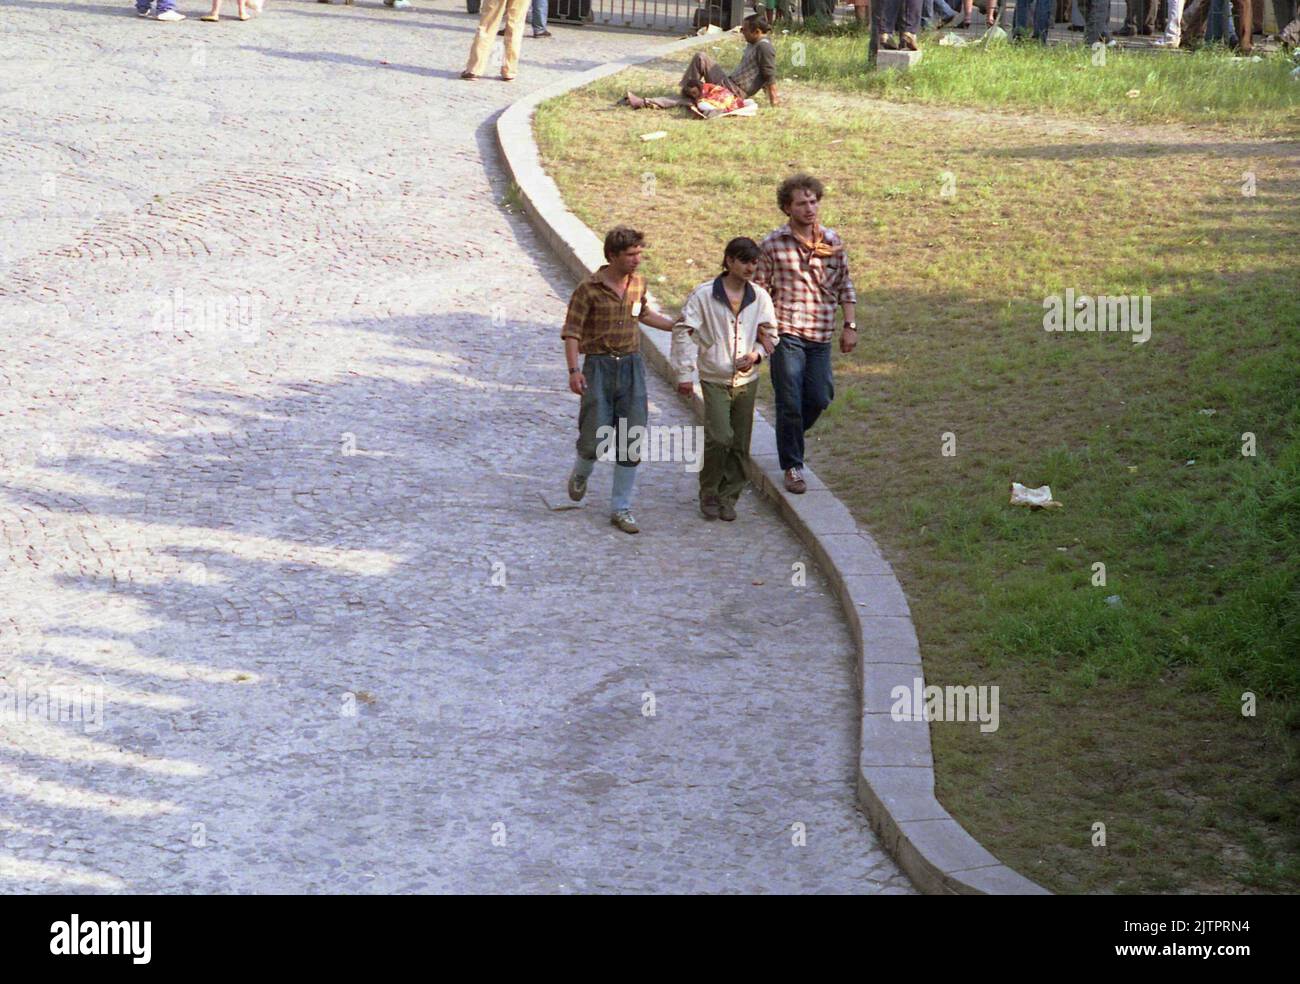 Bucharest, Romania, April 1990. A few months after the anti-communist revolution, sign of poverty and struggle were still seen anywhere. Here, an intoxicated man is helped by two others to walk. Stock Photo